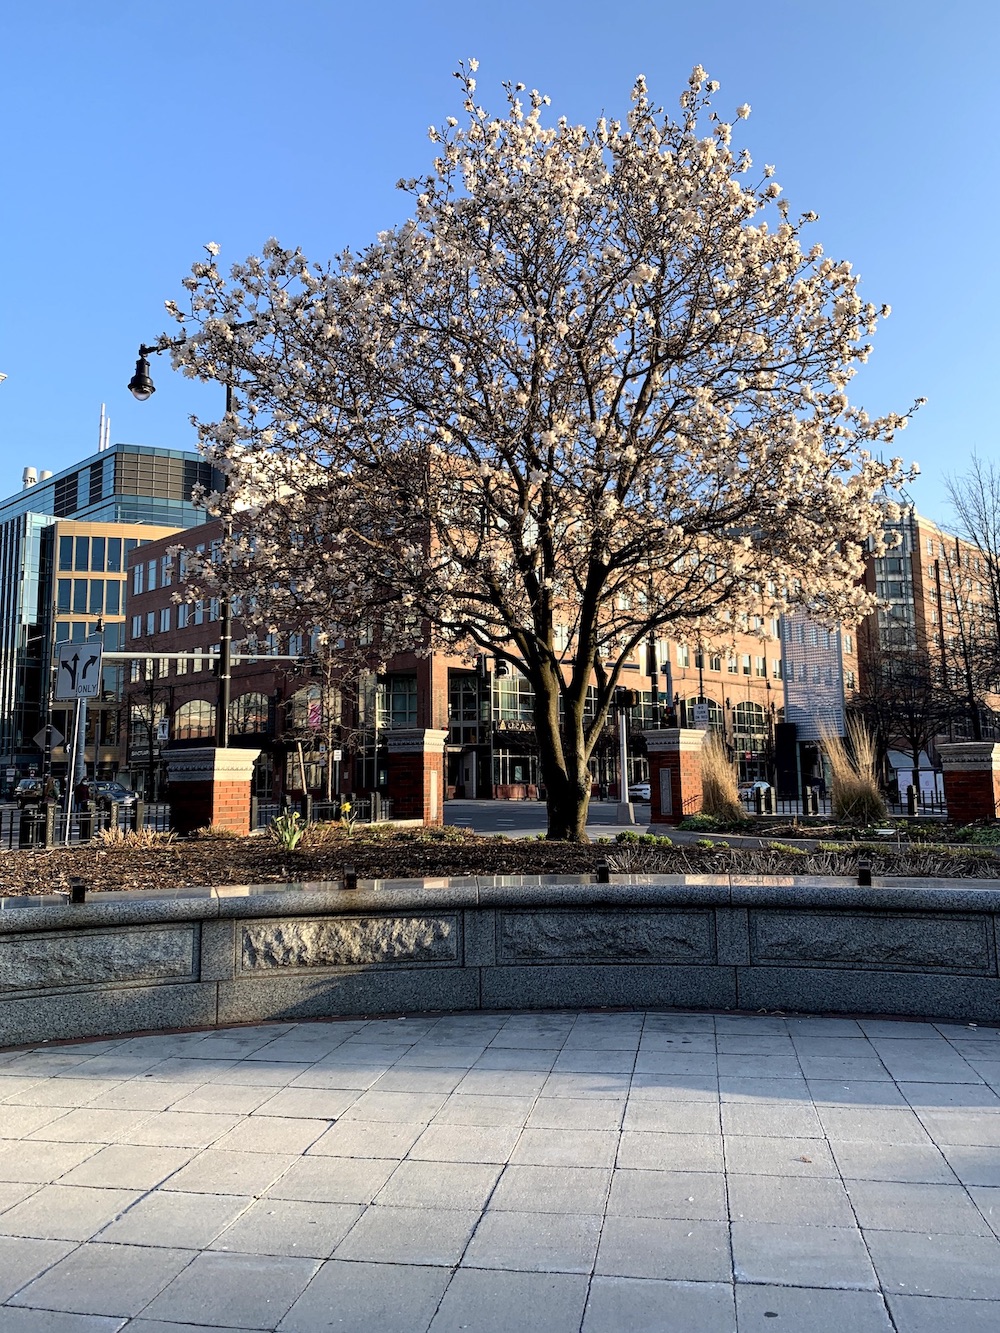 The tree in front of Market Central stands tall with its spring blossoms.